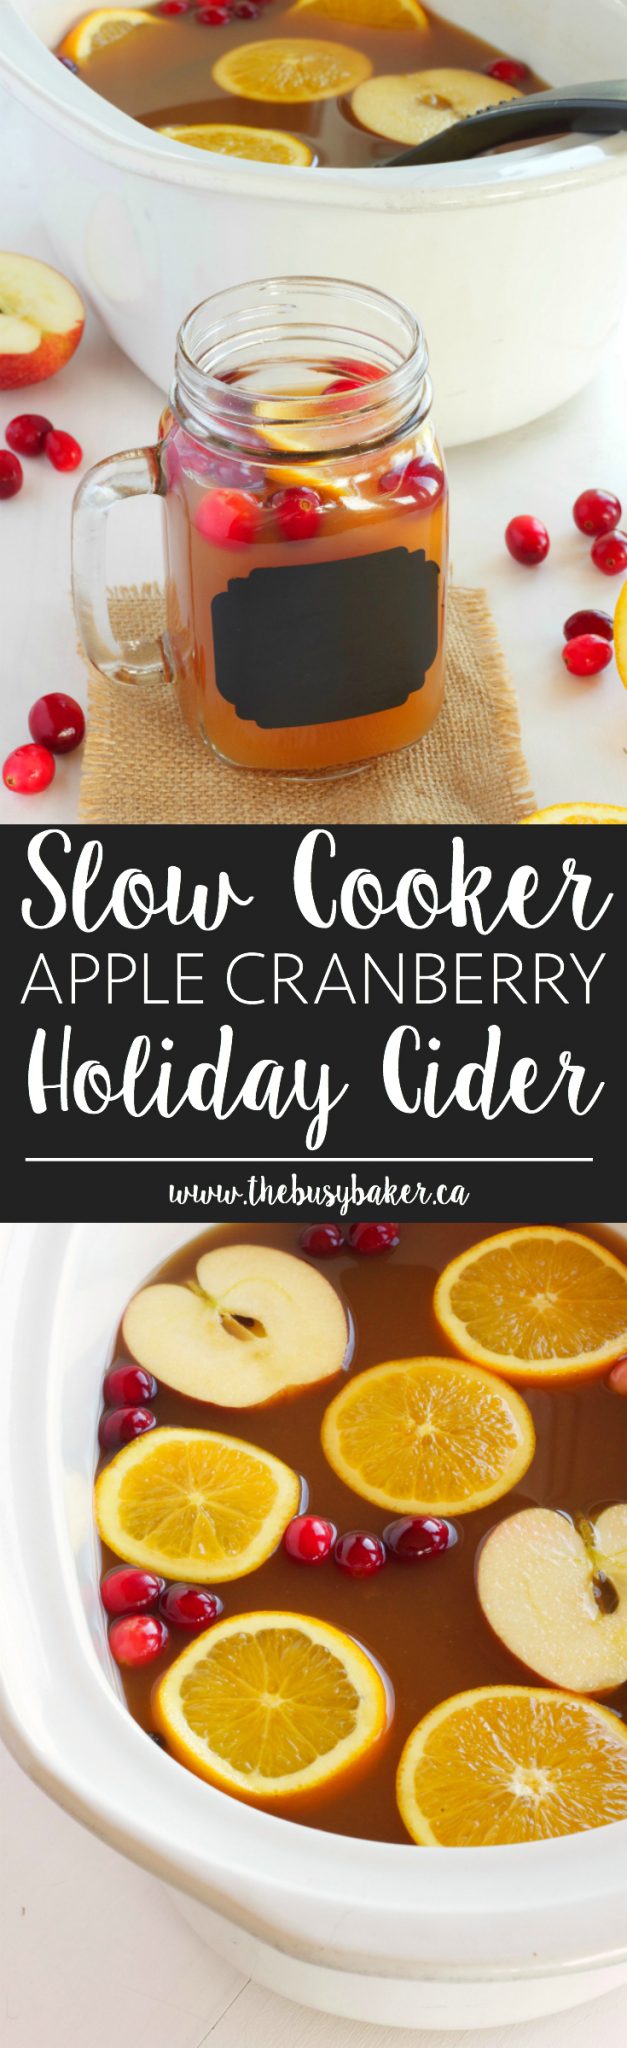 This easy Slow Cooker Apple Cranberry Cider is the perfect warm drink for the holidays! This simple Crock Pot cider recipe will make your house smell amazing, and it's a delicious drink to serve all your holiday guests, made with only a few simple ingredients! Recipe from thebusybaker.ca! via @busybakerblog